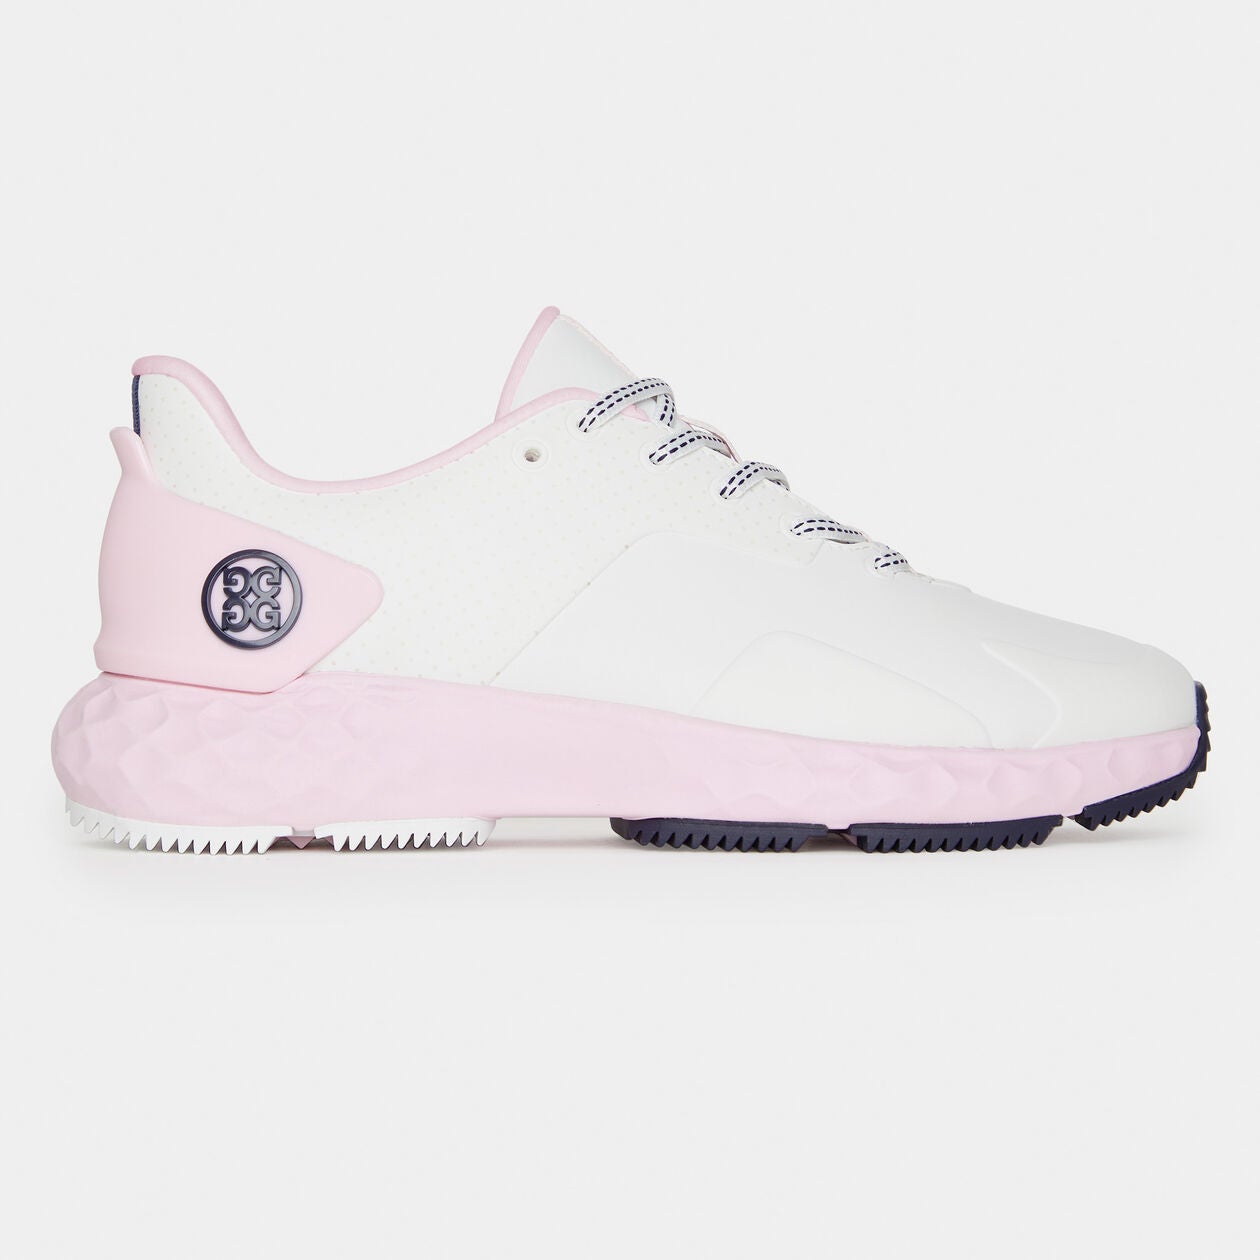 Perforated MG4+ Women's Golf Shoe